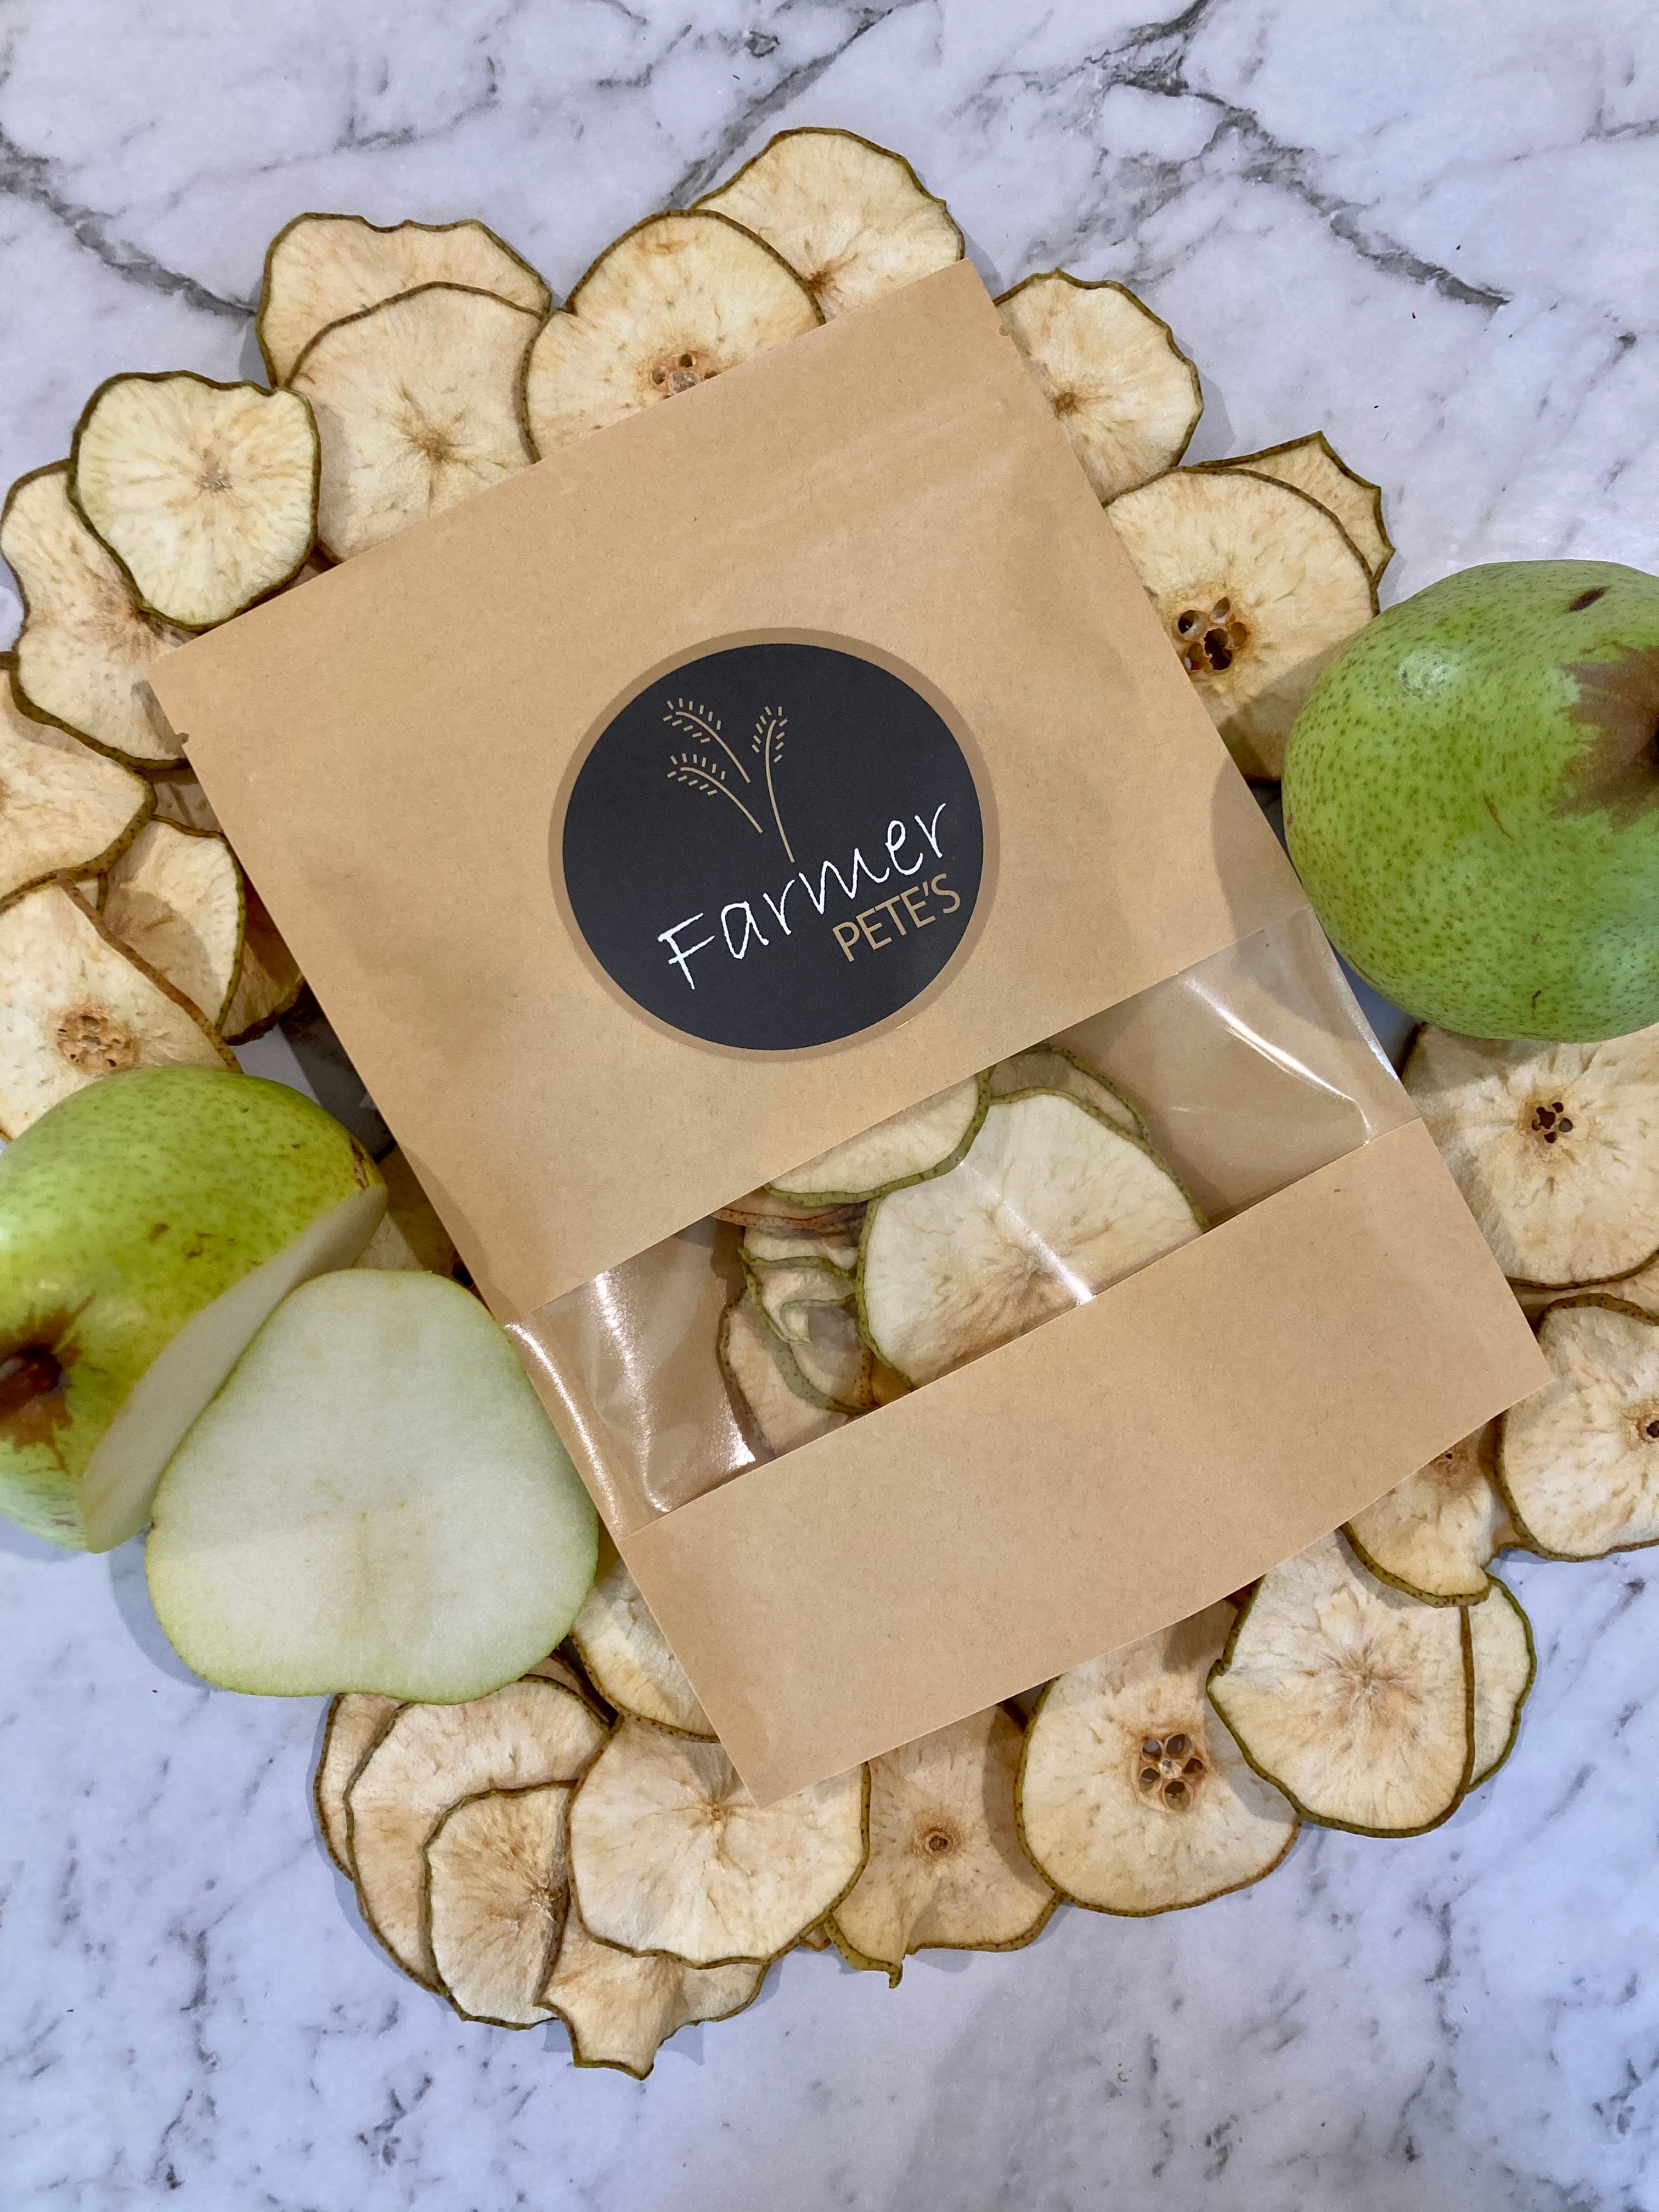 Dehydrated pear treats for pocket pets by Farmer Pete's.